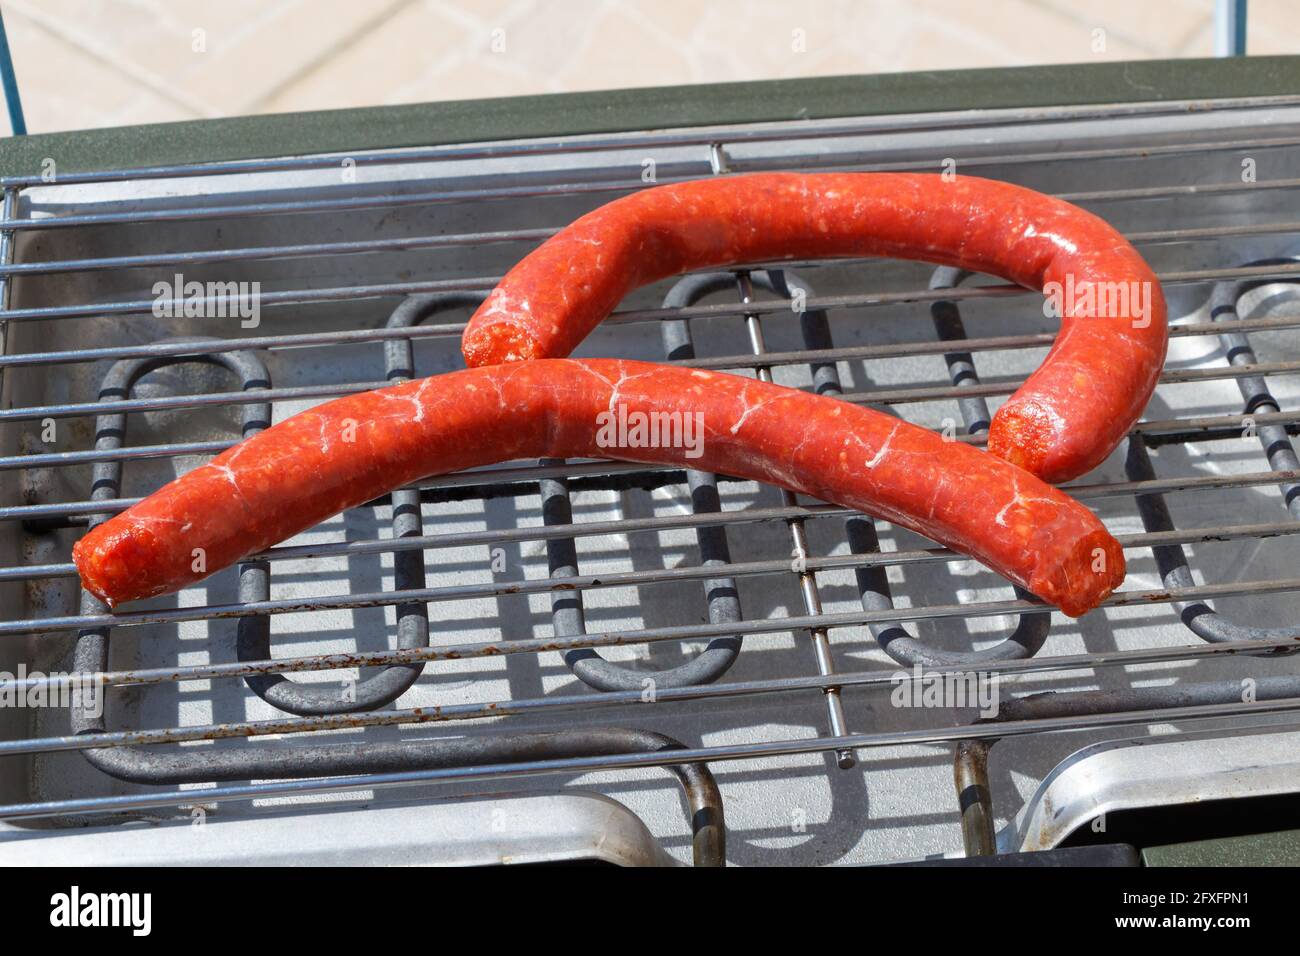 Two raw merguez on the grid of an electric barbecue Stock Photo